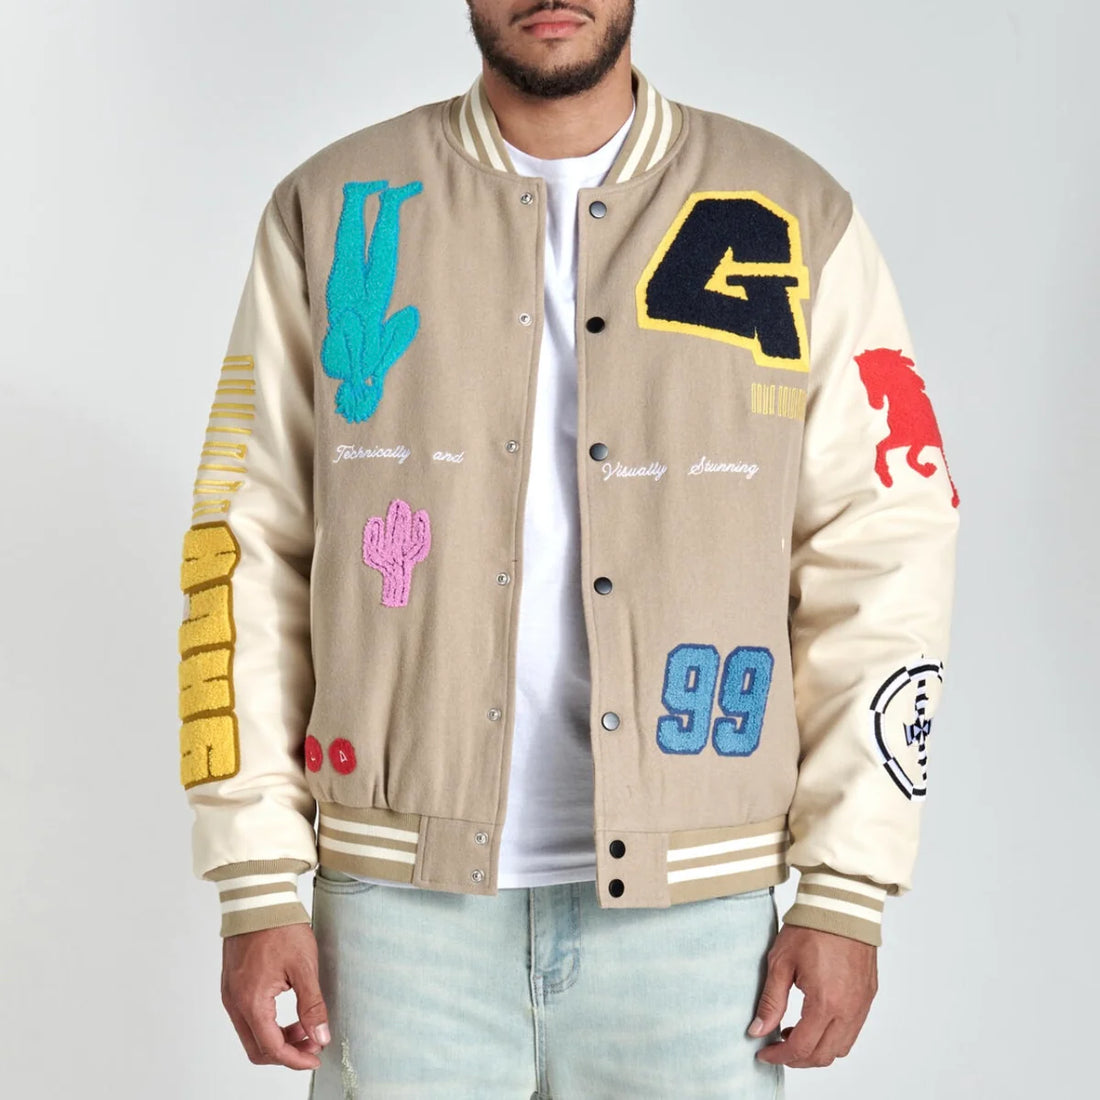 GALA “IT’S COMPLICATED” VARISTY JACKET